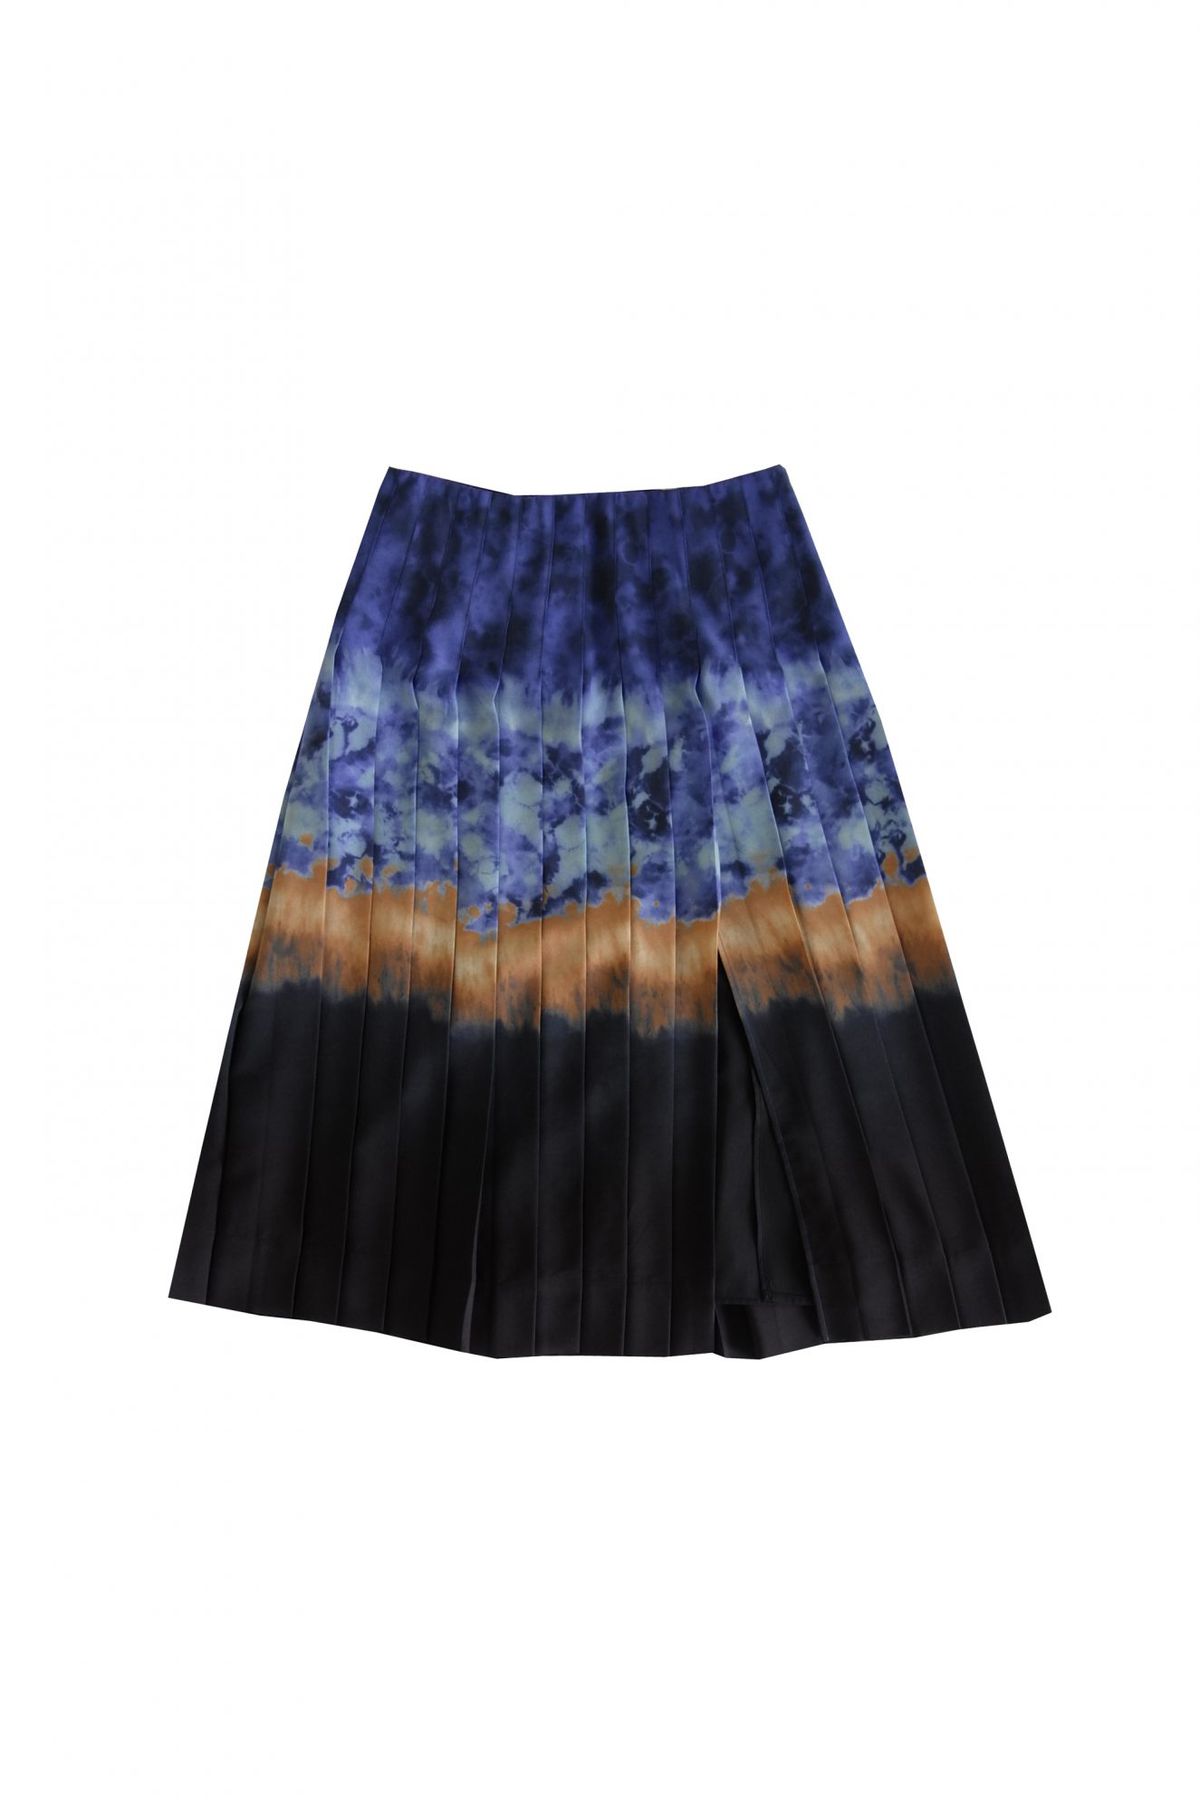 Zurina Pleated Tie-Dyed Skirt